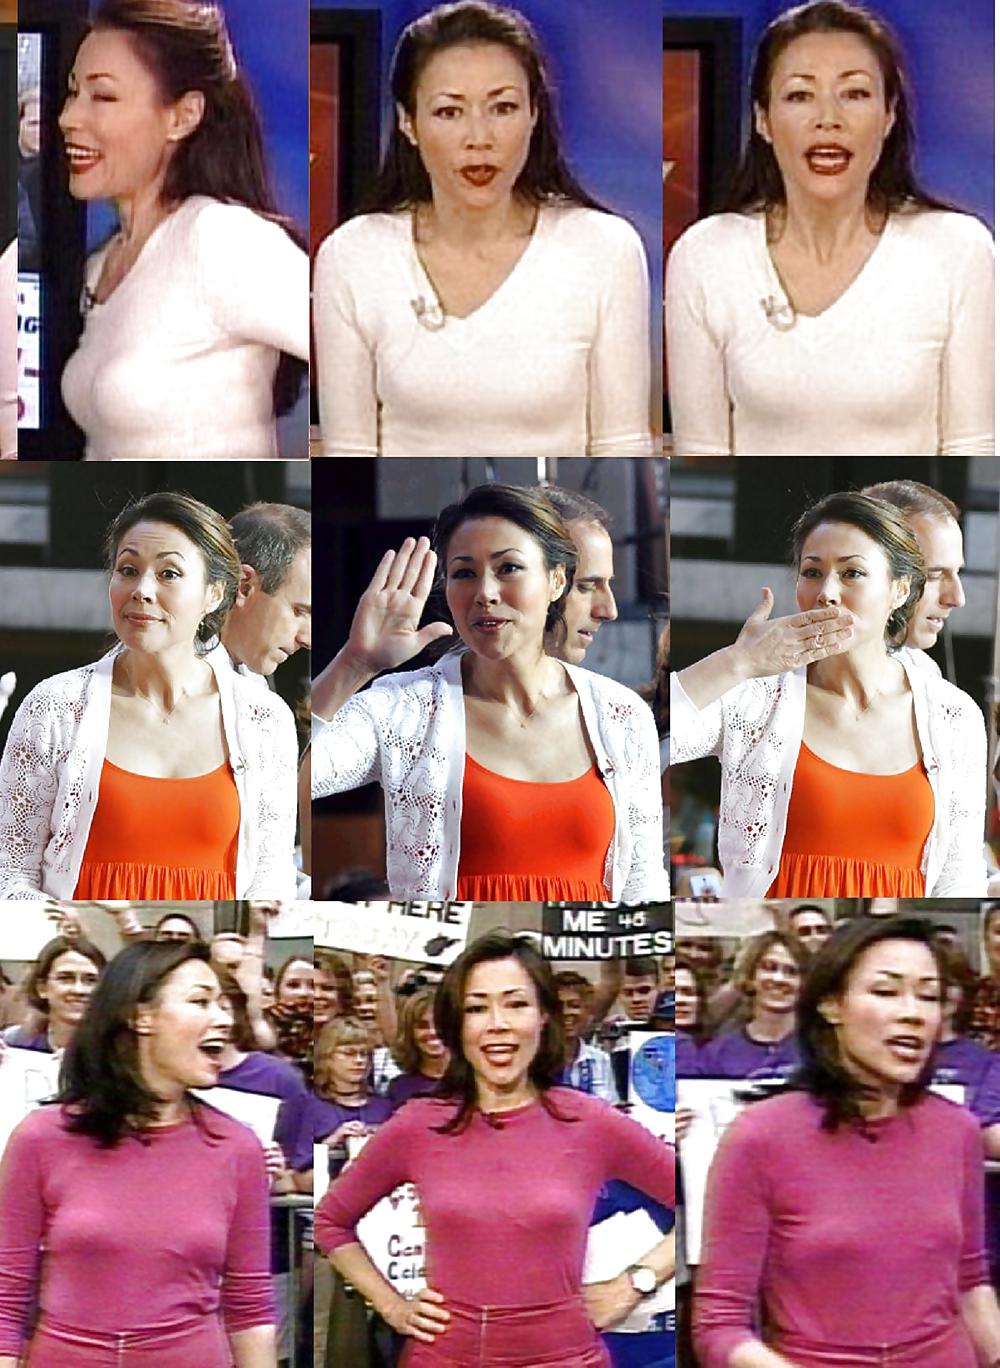 Ann Curry is a very sexual MILF